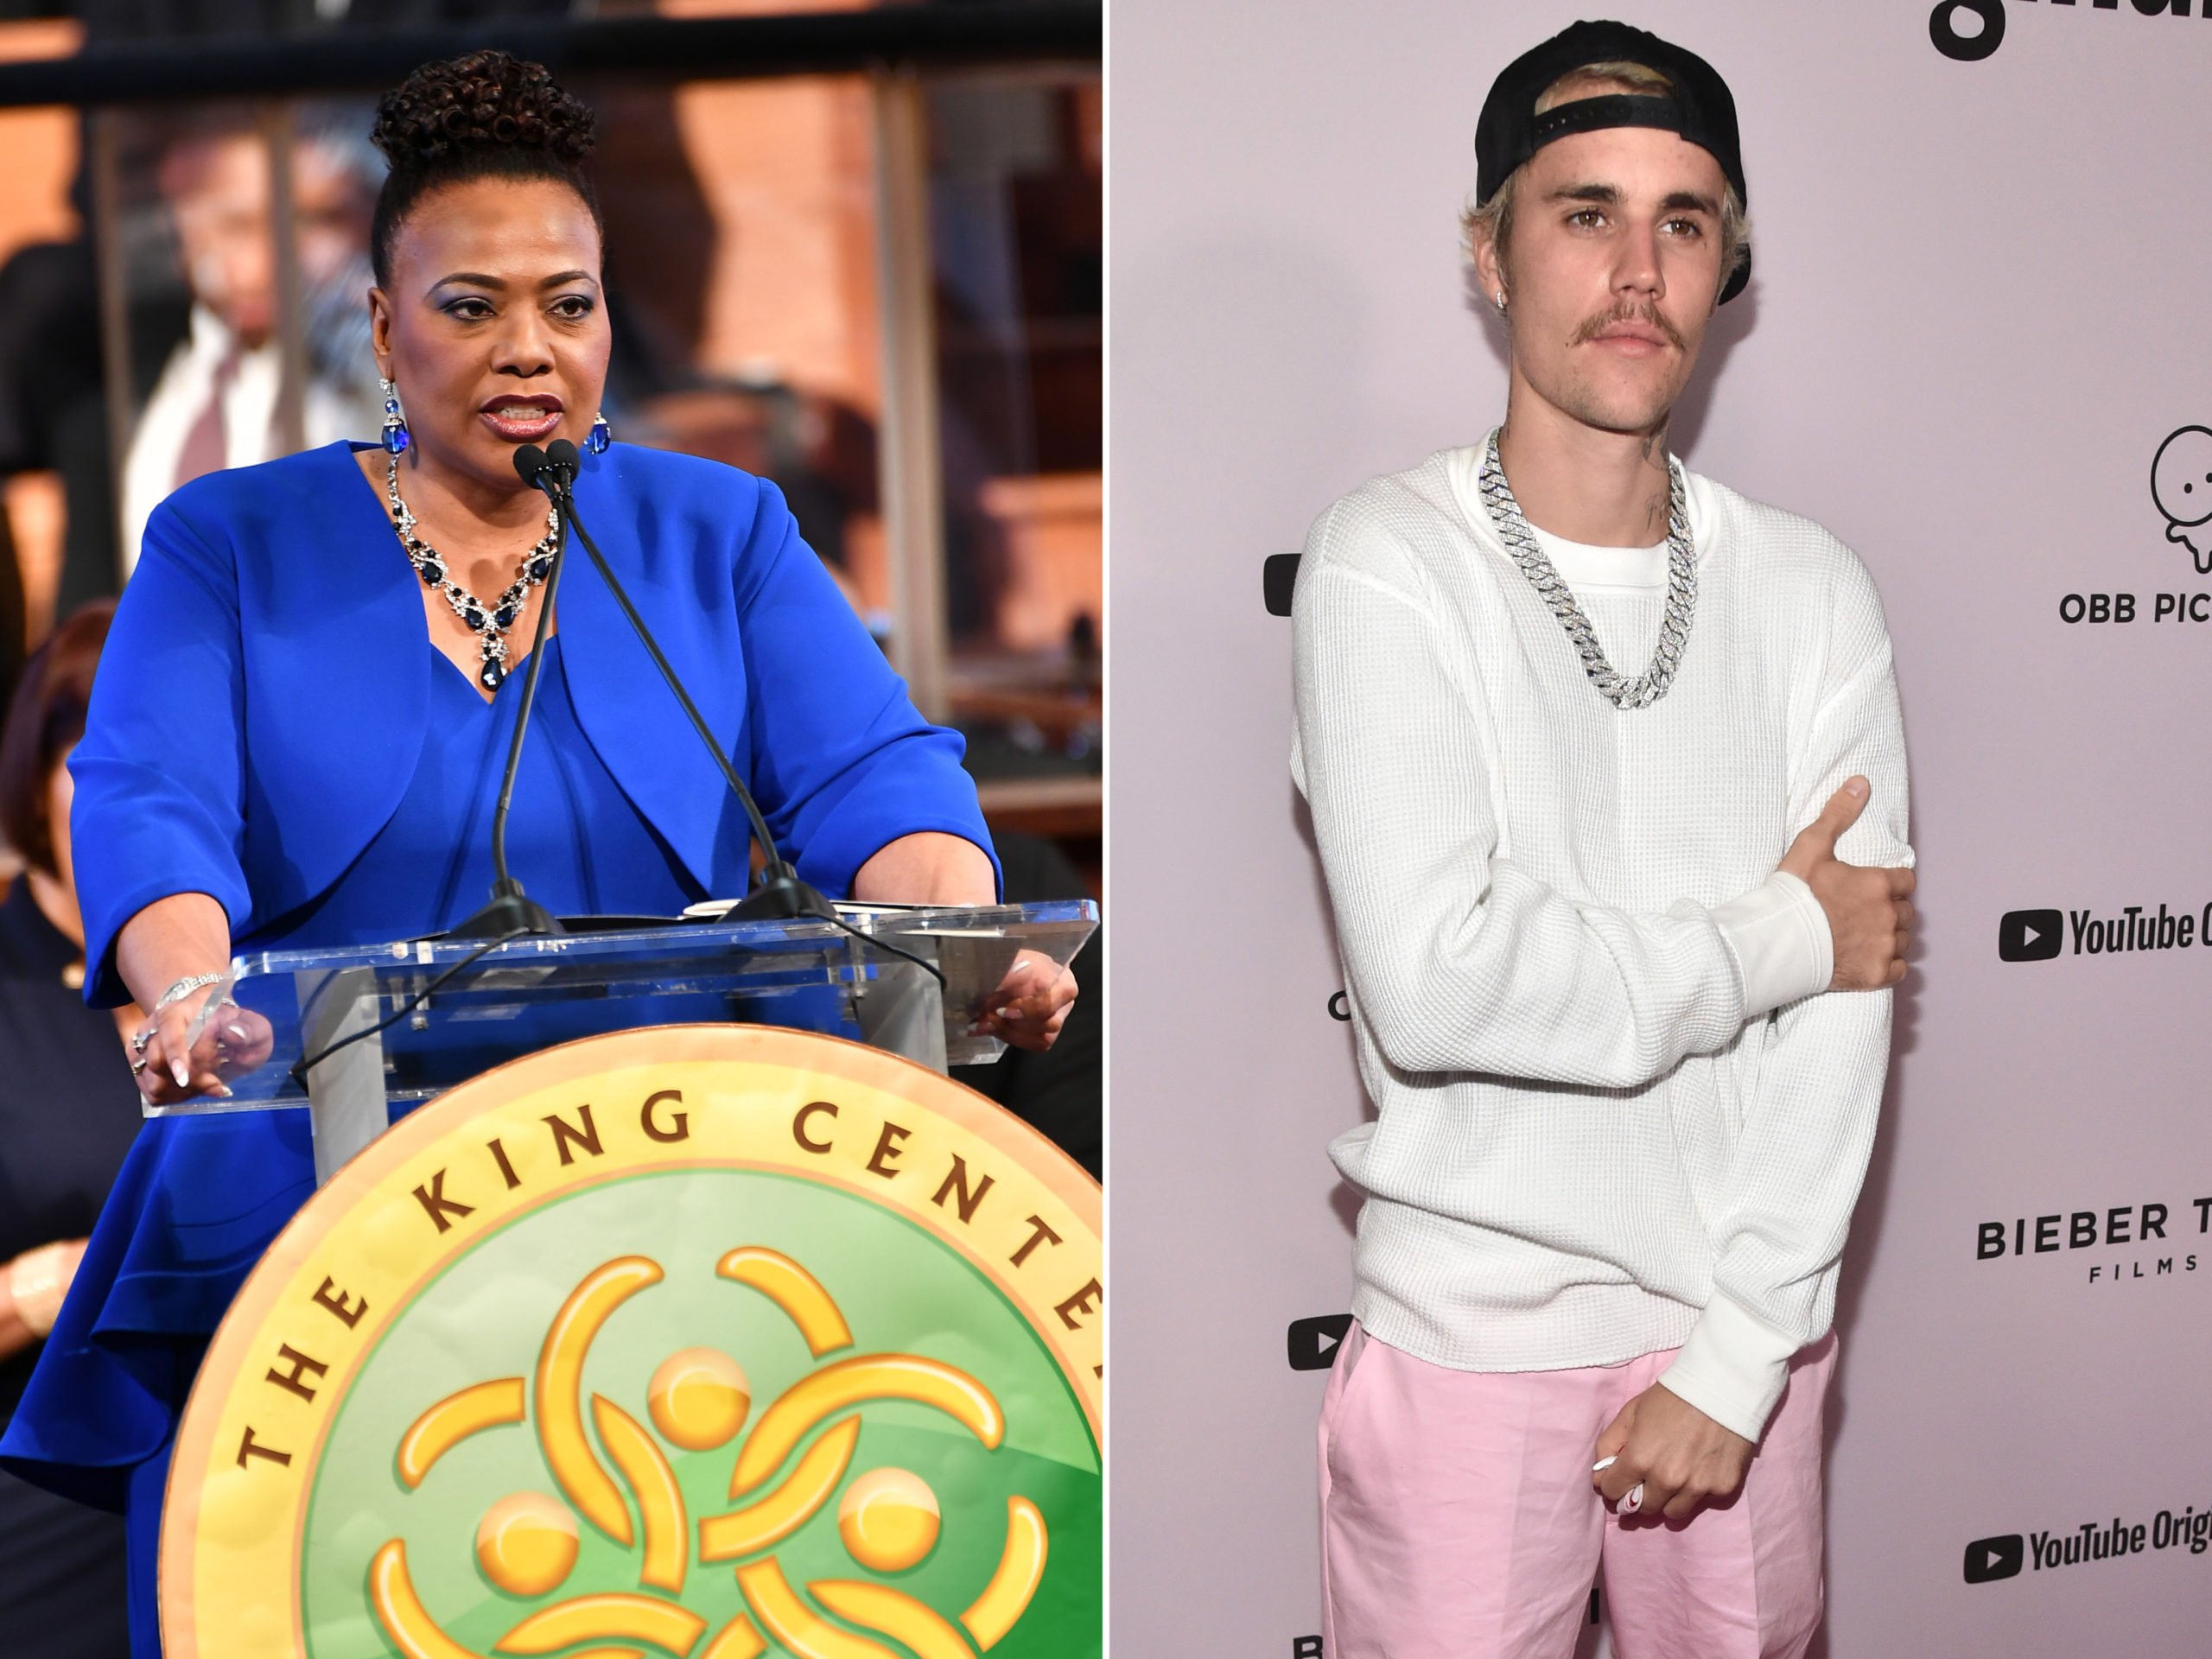 Bernice King Thanks Justin Bieber For Supporting The King Center While He Faces Criticism For Sampling Martin Luther King Jr.’s Voice On His New Album ‘Justice’